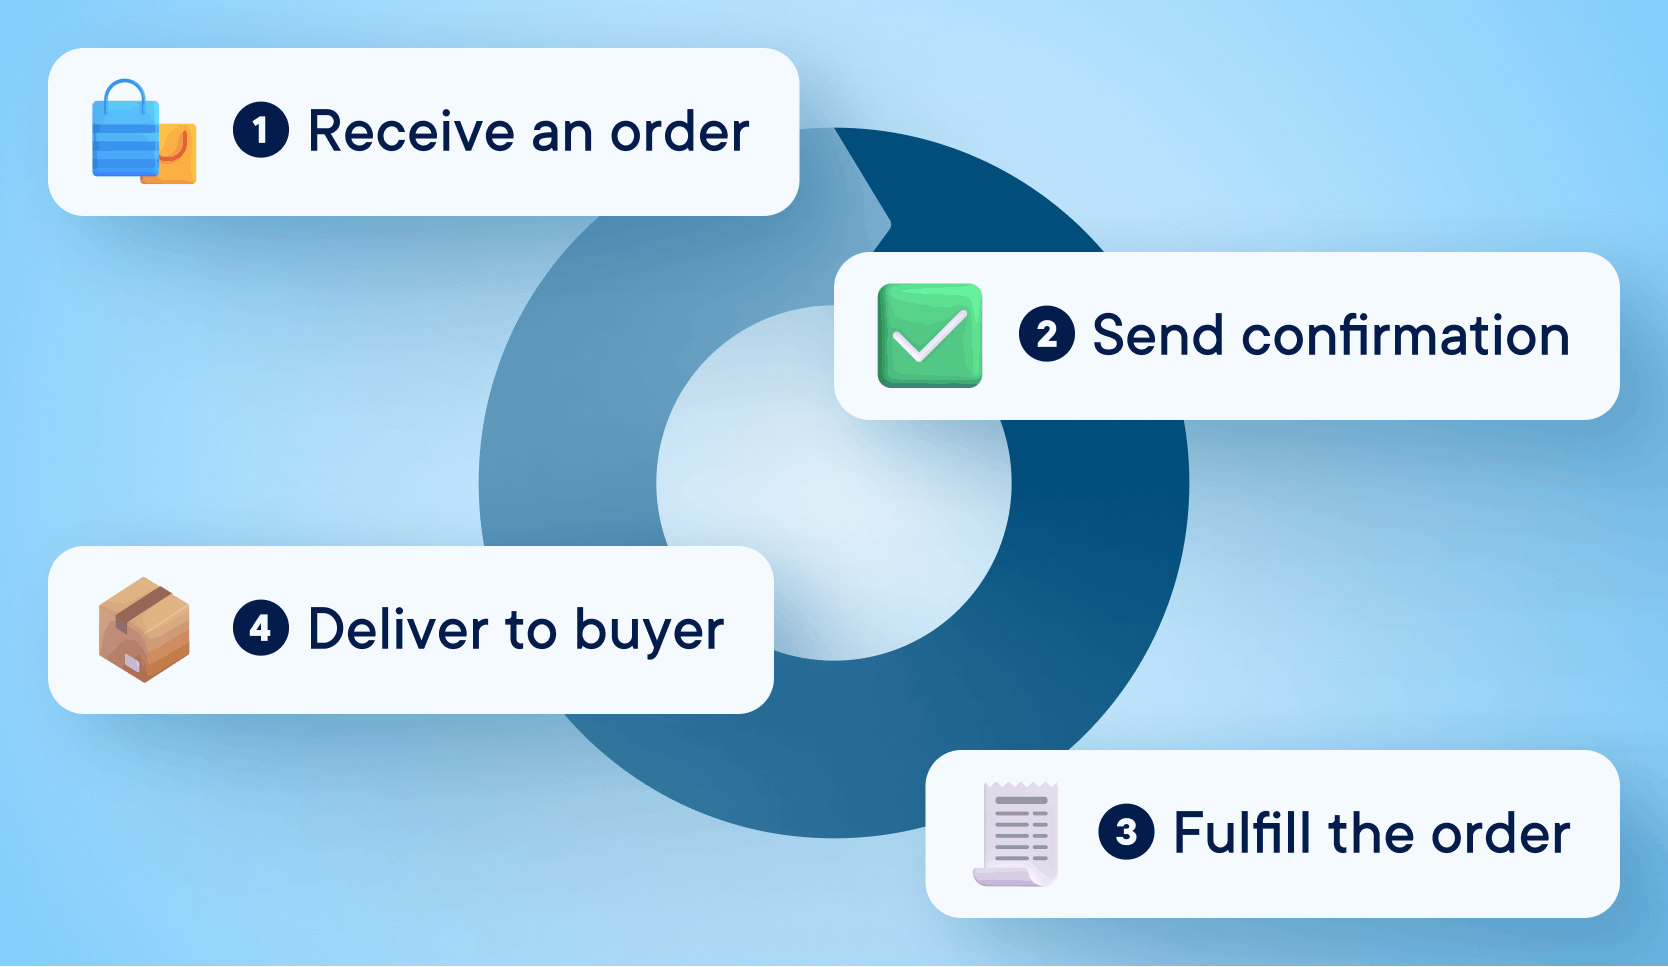 Graph showing a customer order management cycle. Number 1: receive an order; number 2: send confirmation; number 3: fulfil the order; number 4: deliver order to the buyer.